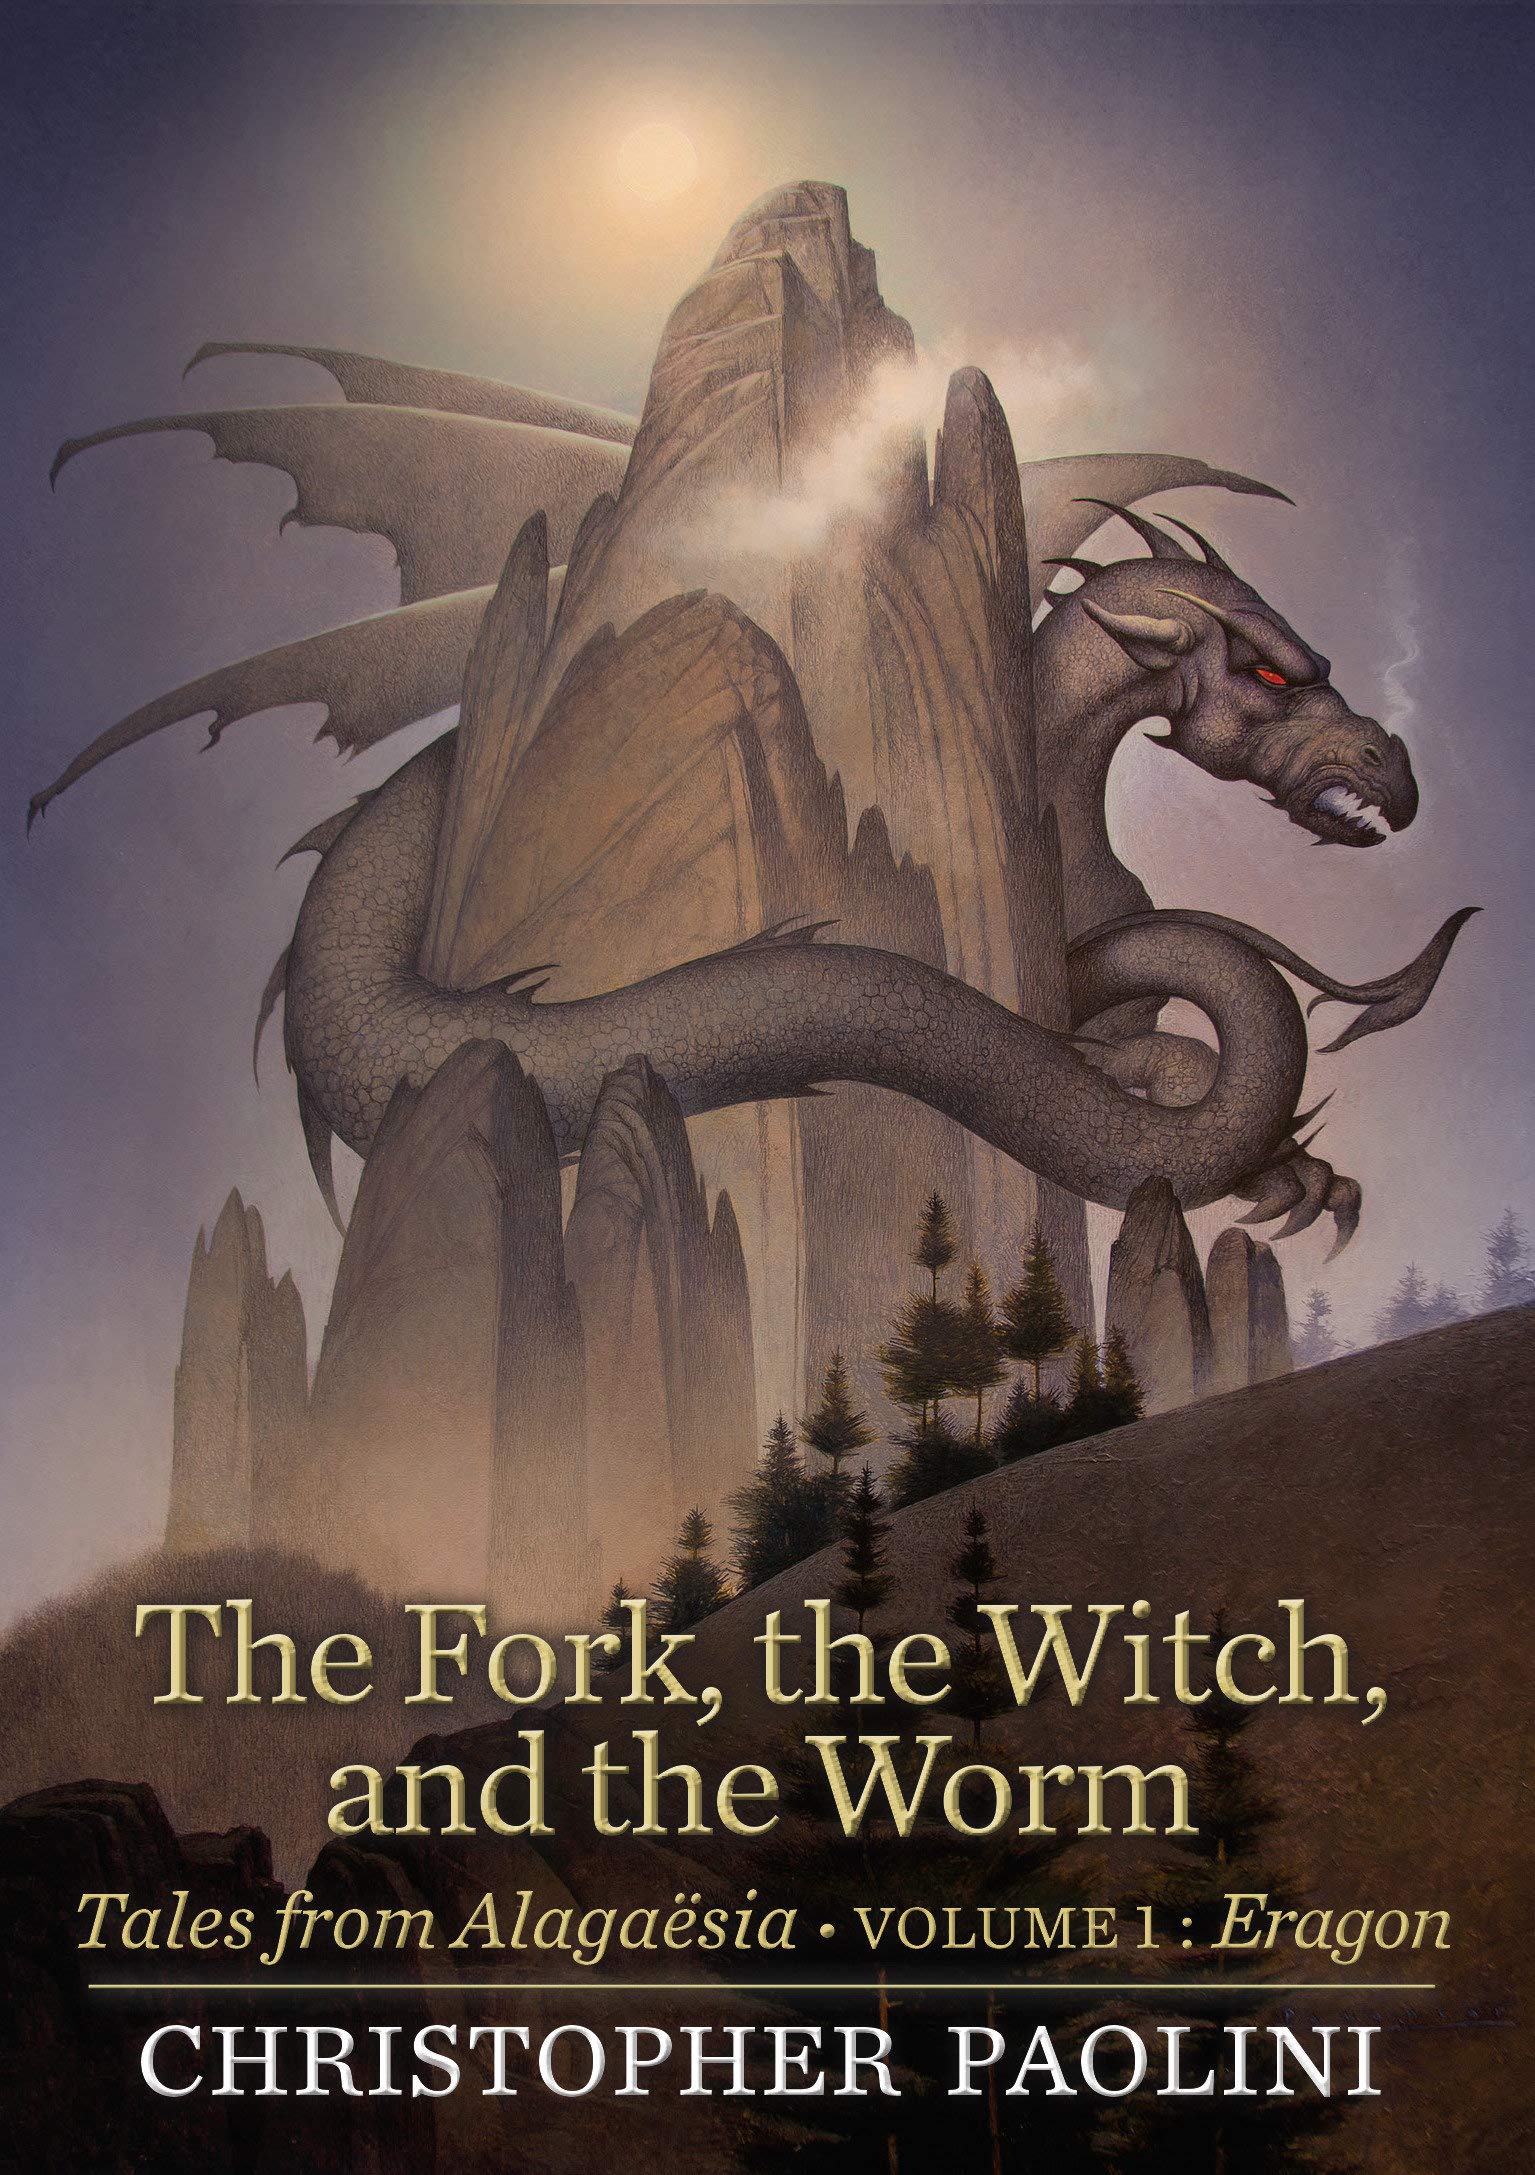 The Fork, the Witch, and the Worm - Volumul 1 | Christopher Paolini